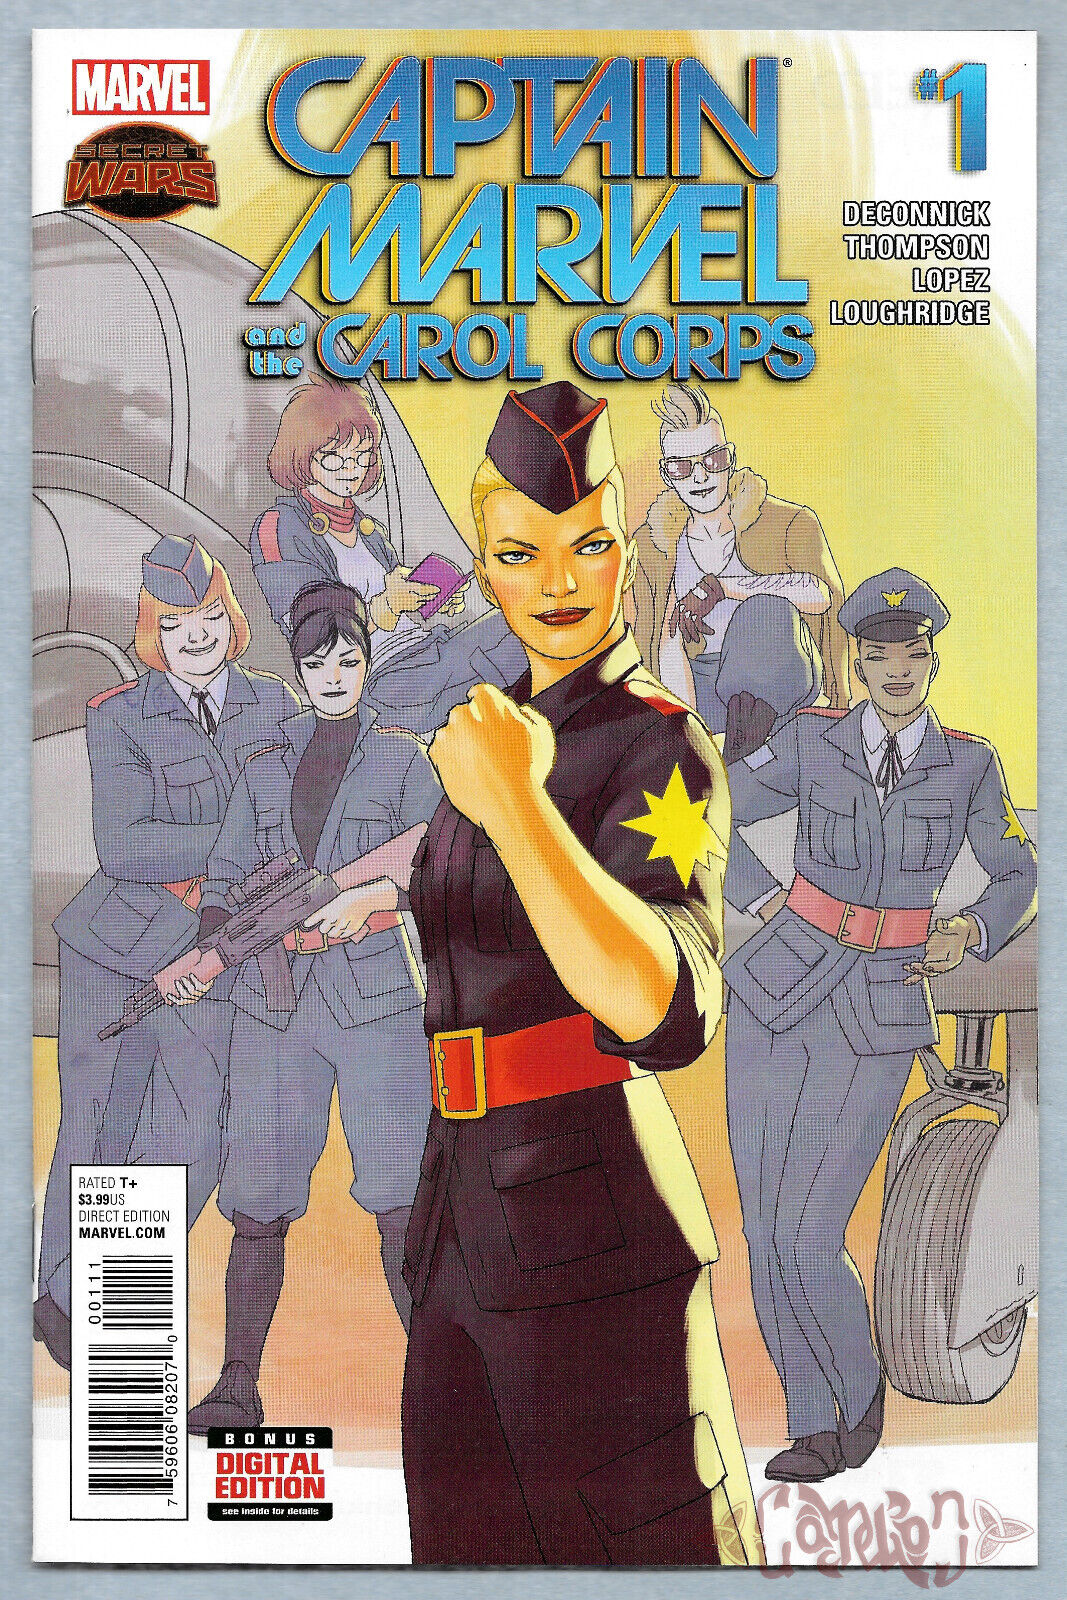 Captain Marvel and the Carol Corps #1 (08/2015) Marvel Comics